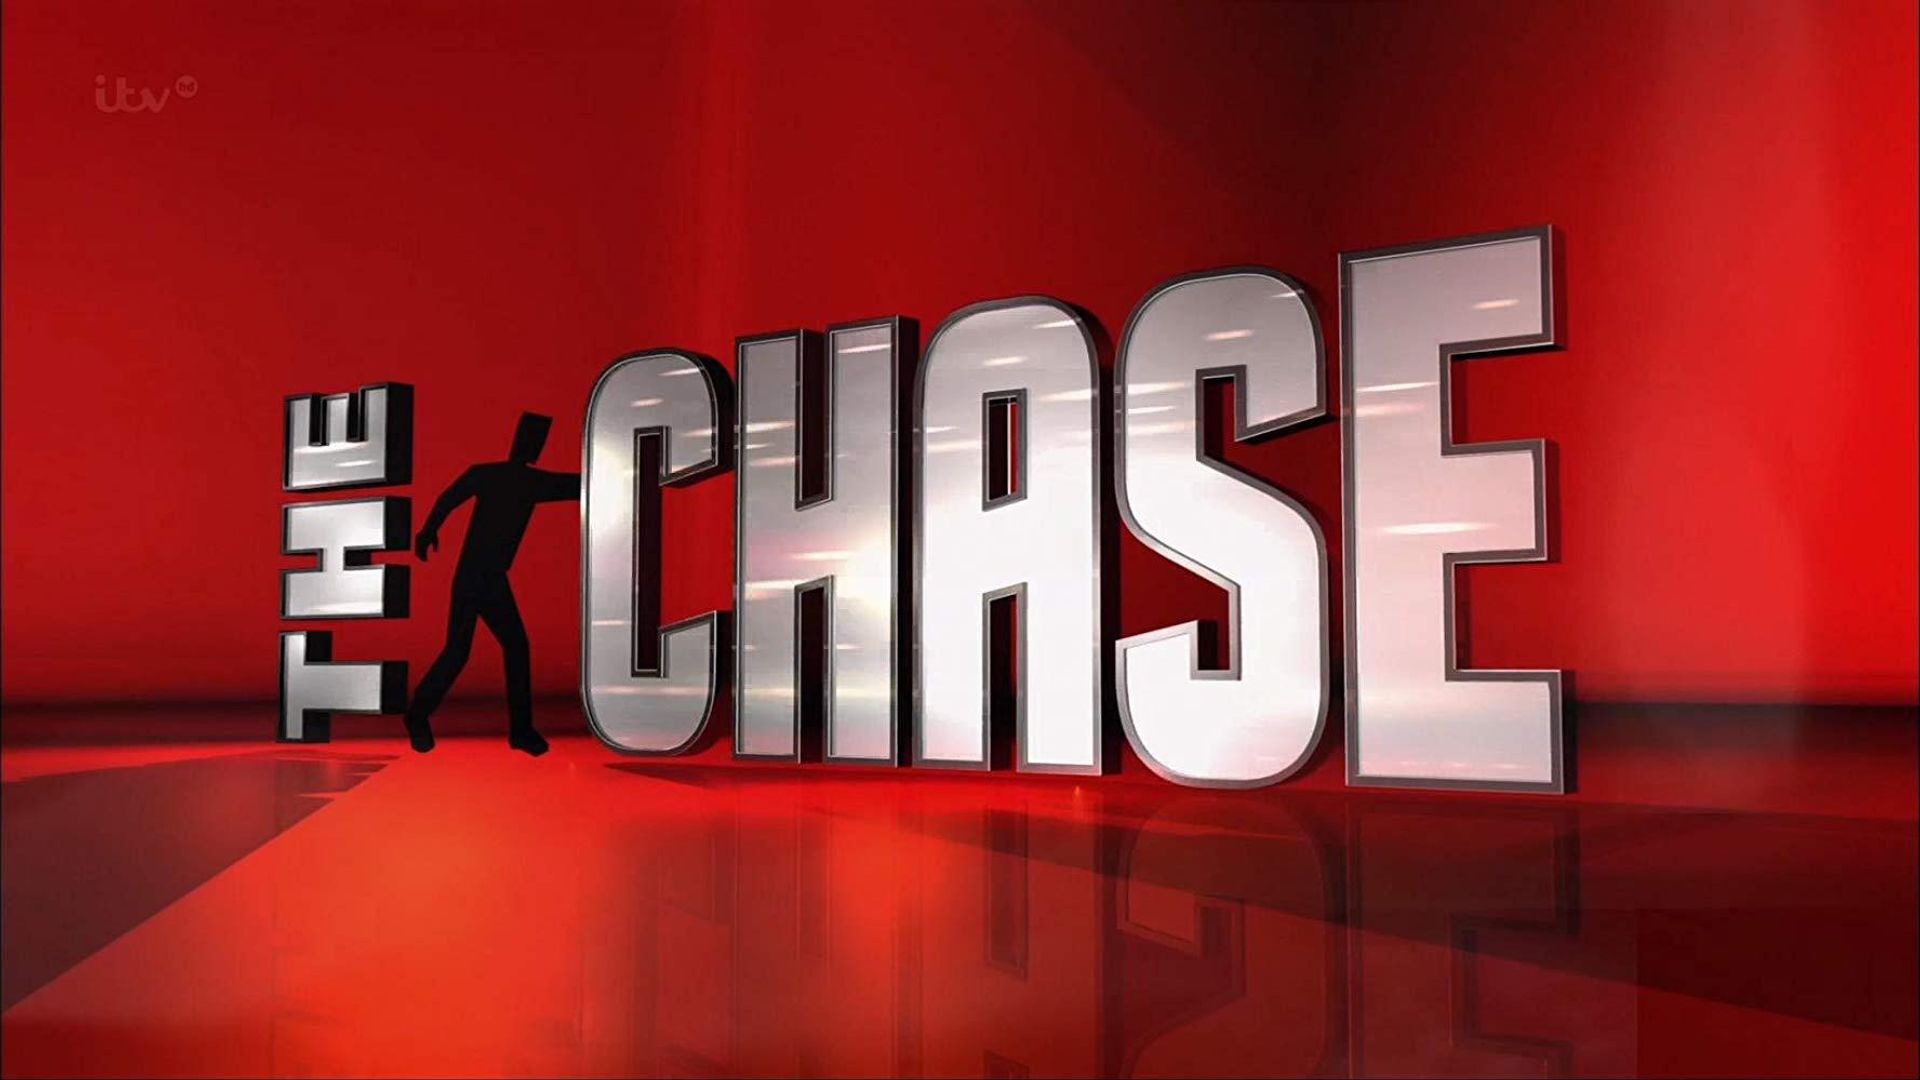 The Chase background